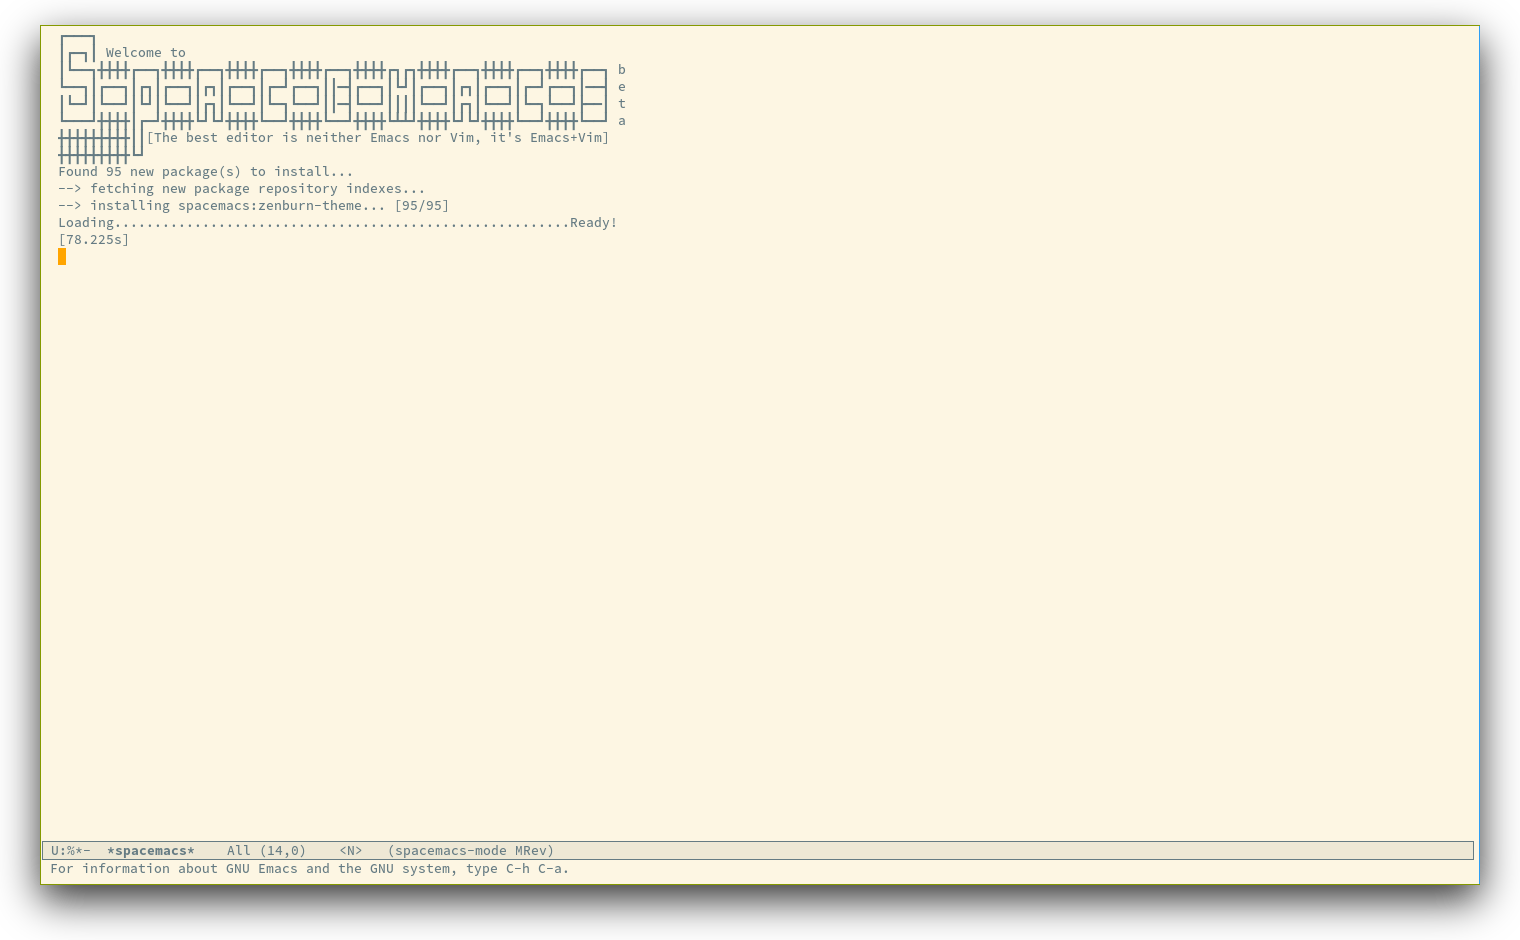 /TakeV/spacemacs/media/commit/13c5b1d24b7dab52d78aa236786cc6d4f3724d0a/doc/img/spacemacs-startup.png